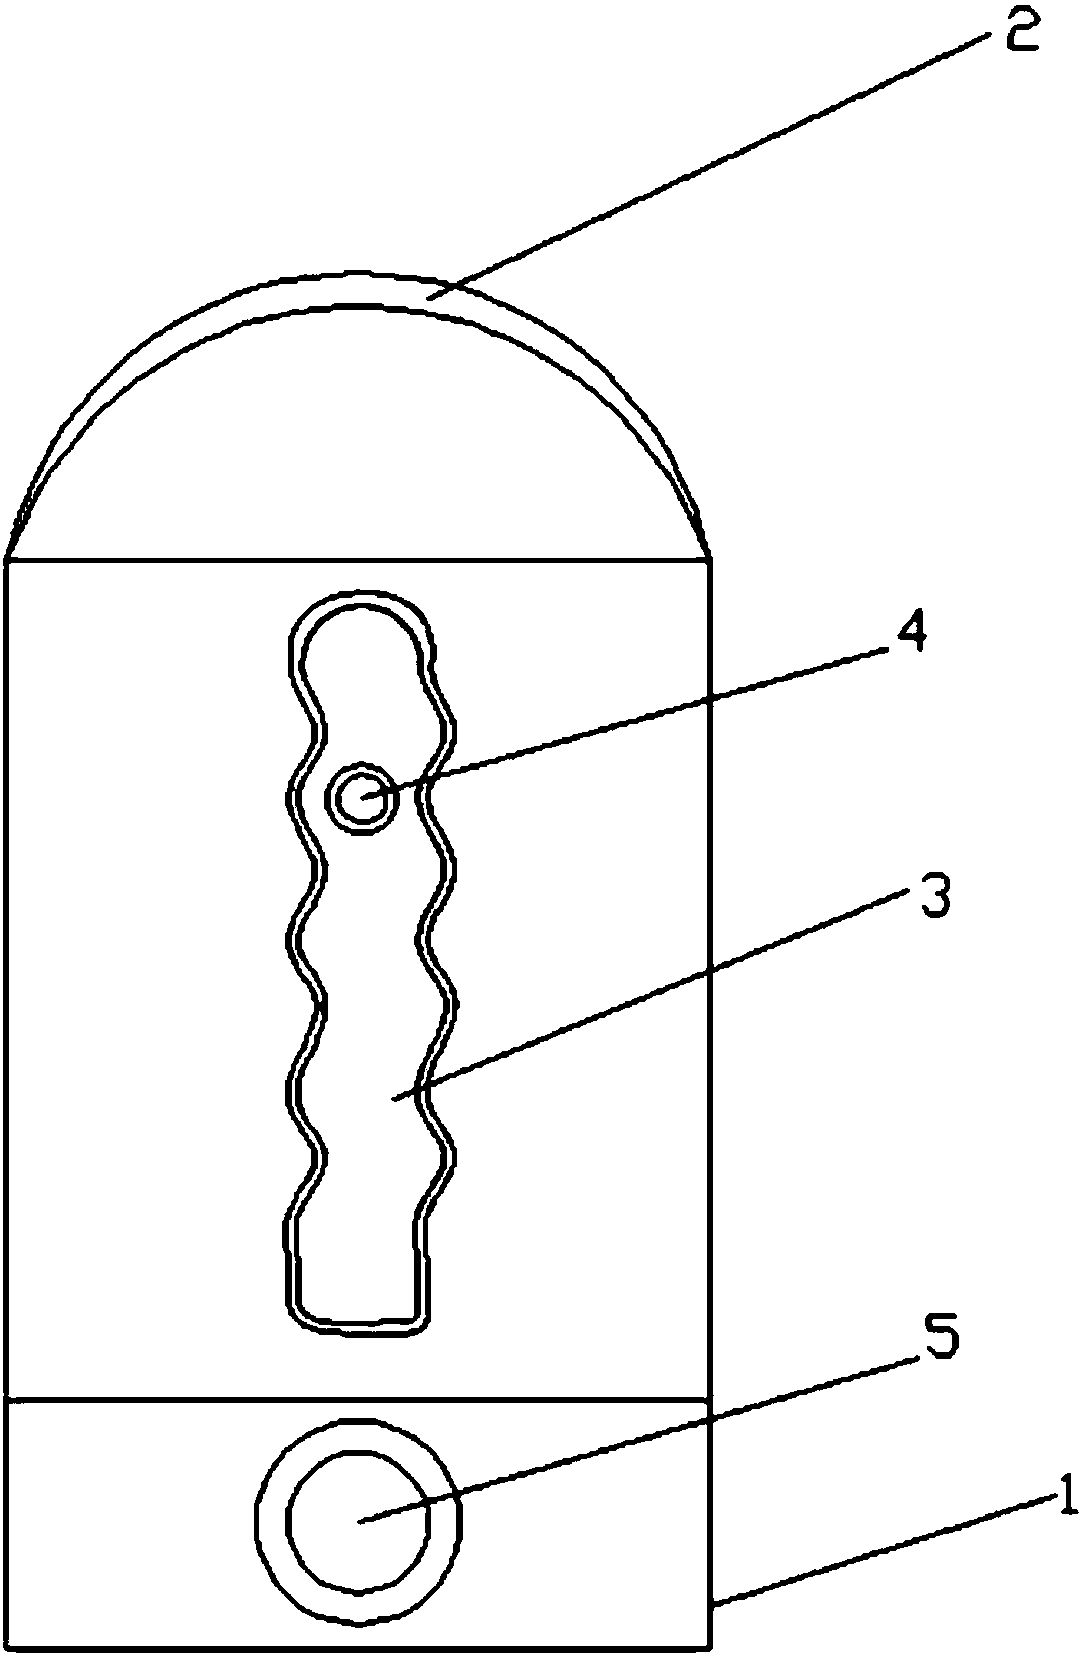 A saw blade structure